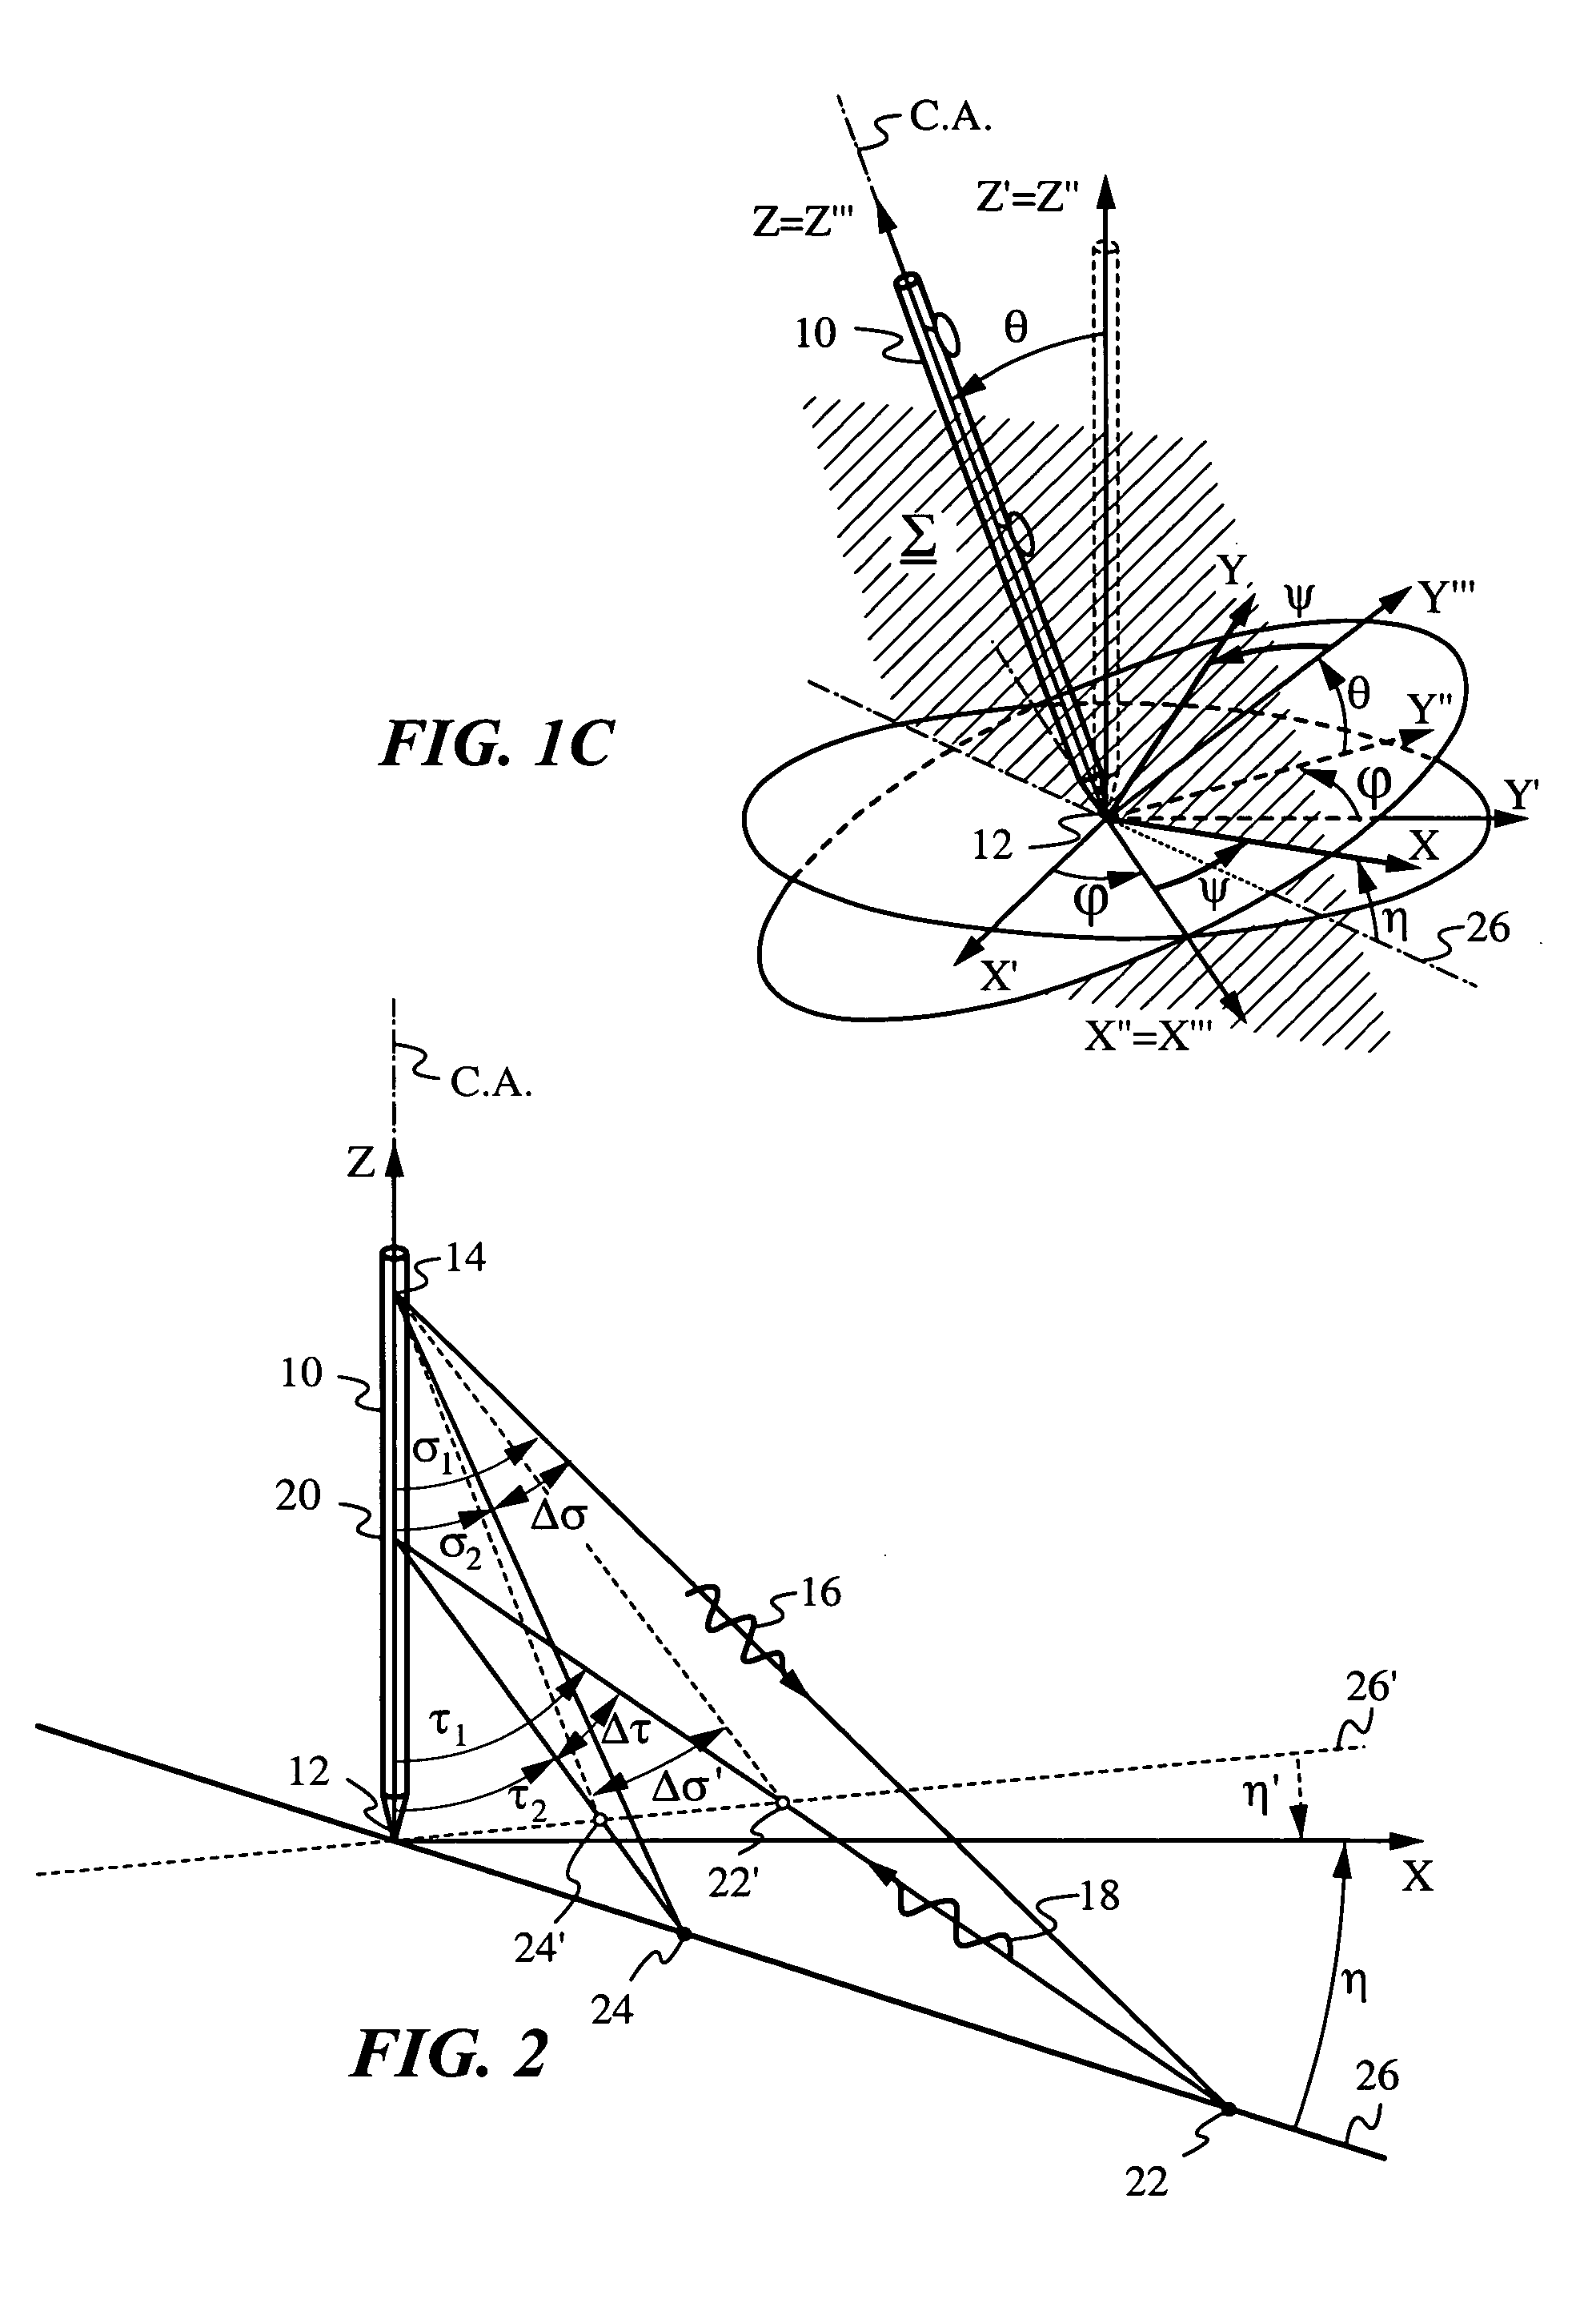 Determination of an orientation parameter of an elongate object with a scan beam apparatus